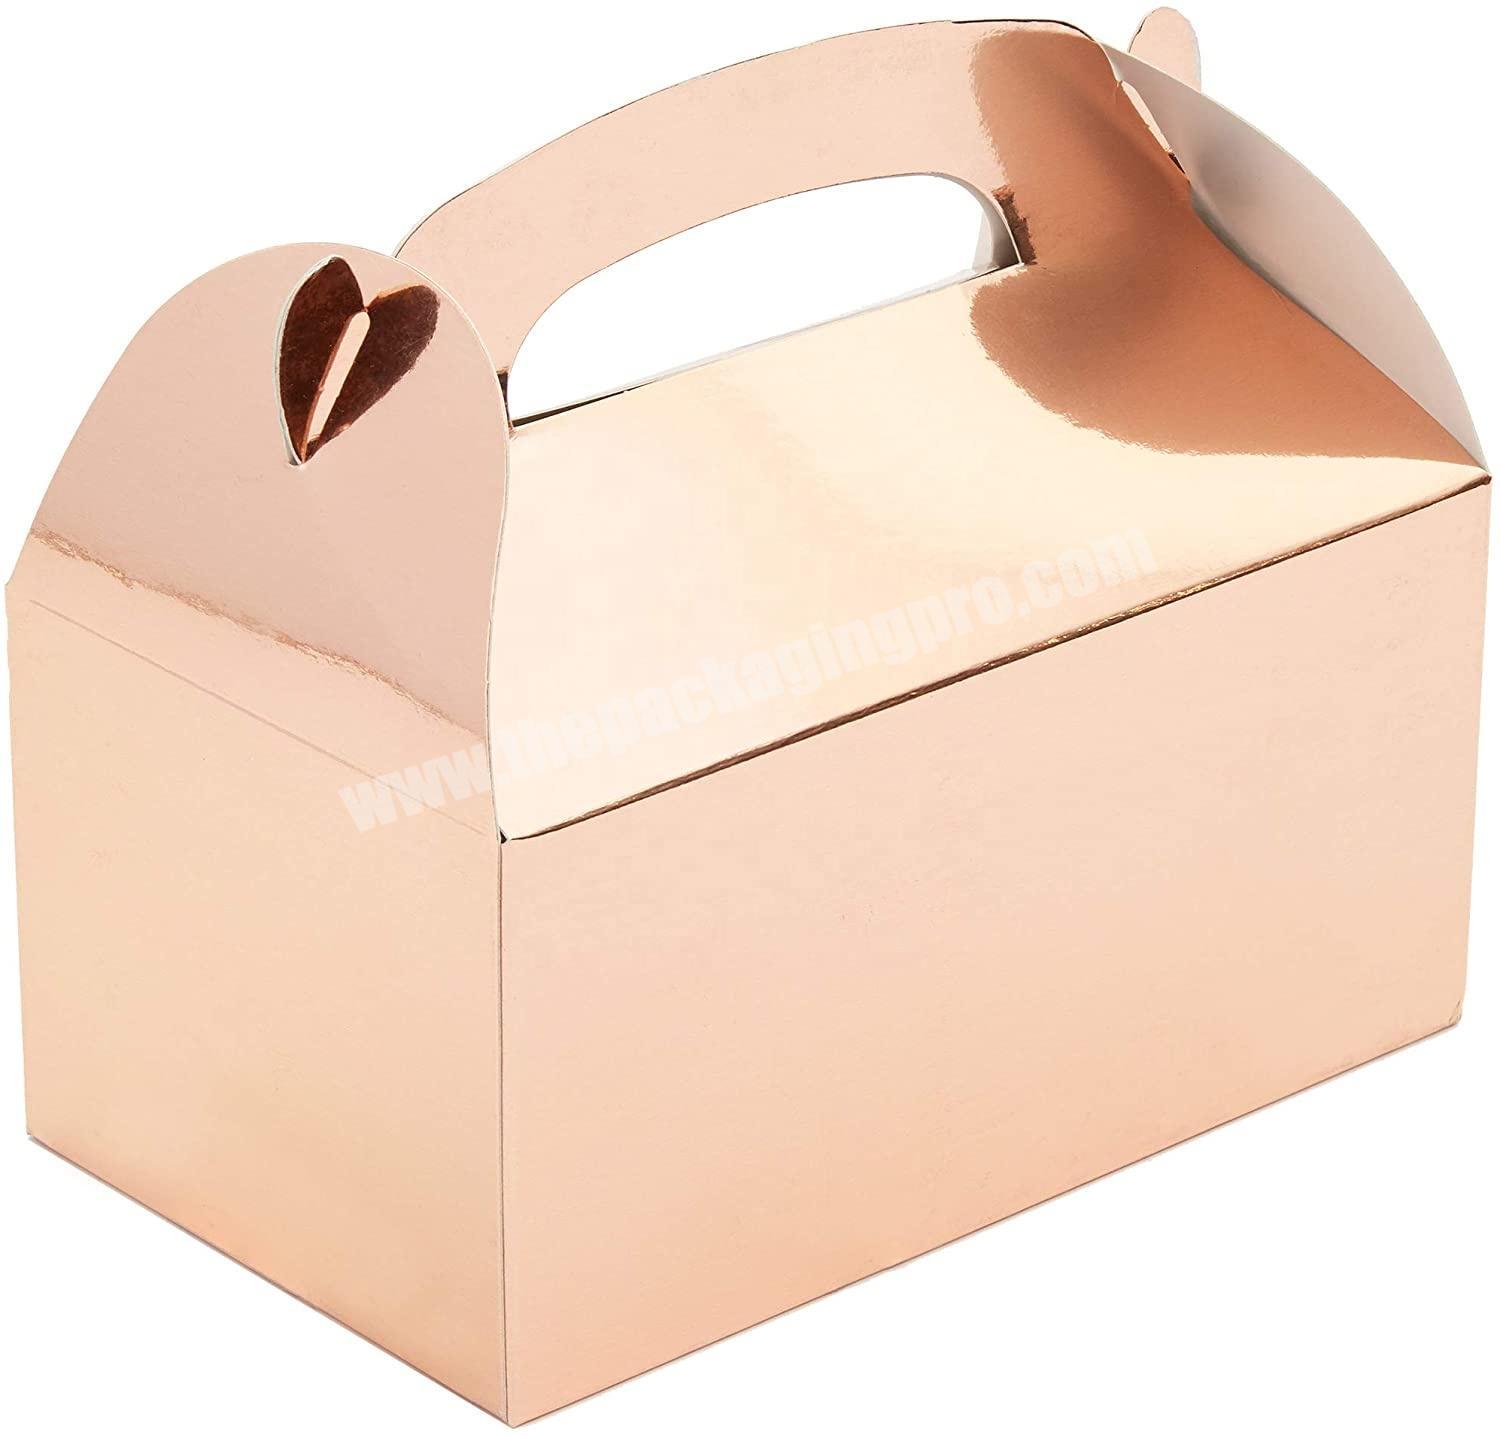 Mountain wall rose gold luster gift box elegant wedding candy cookies gift box